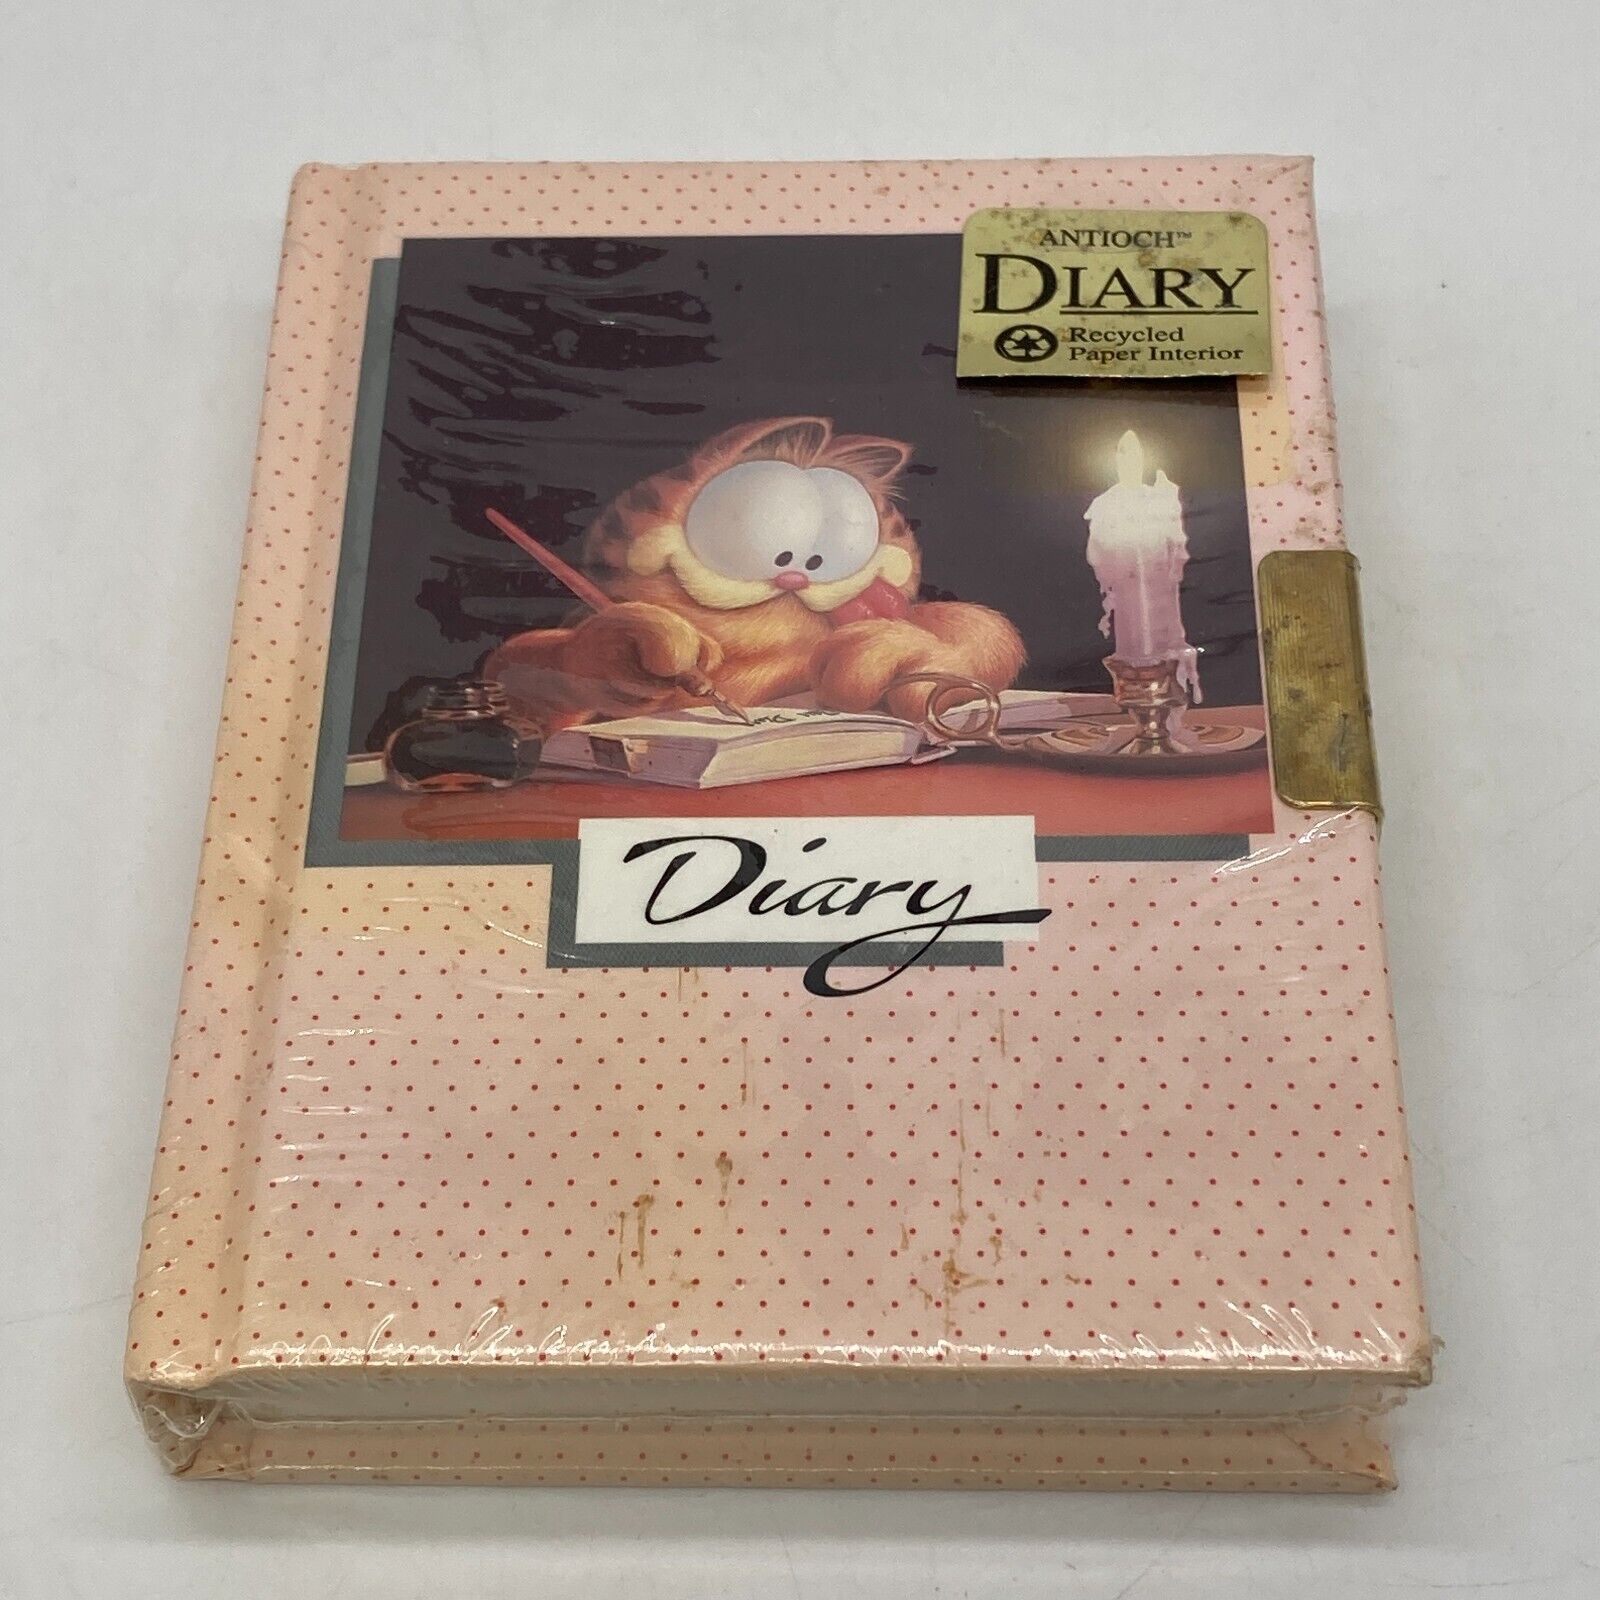 NEW SEALED GARFIELD VINTAGE 70S DIARY BY ANTIOCH LOCK WITH KEY